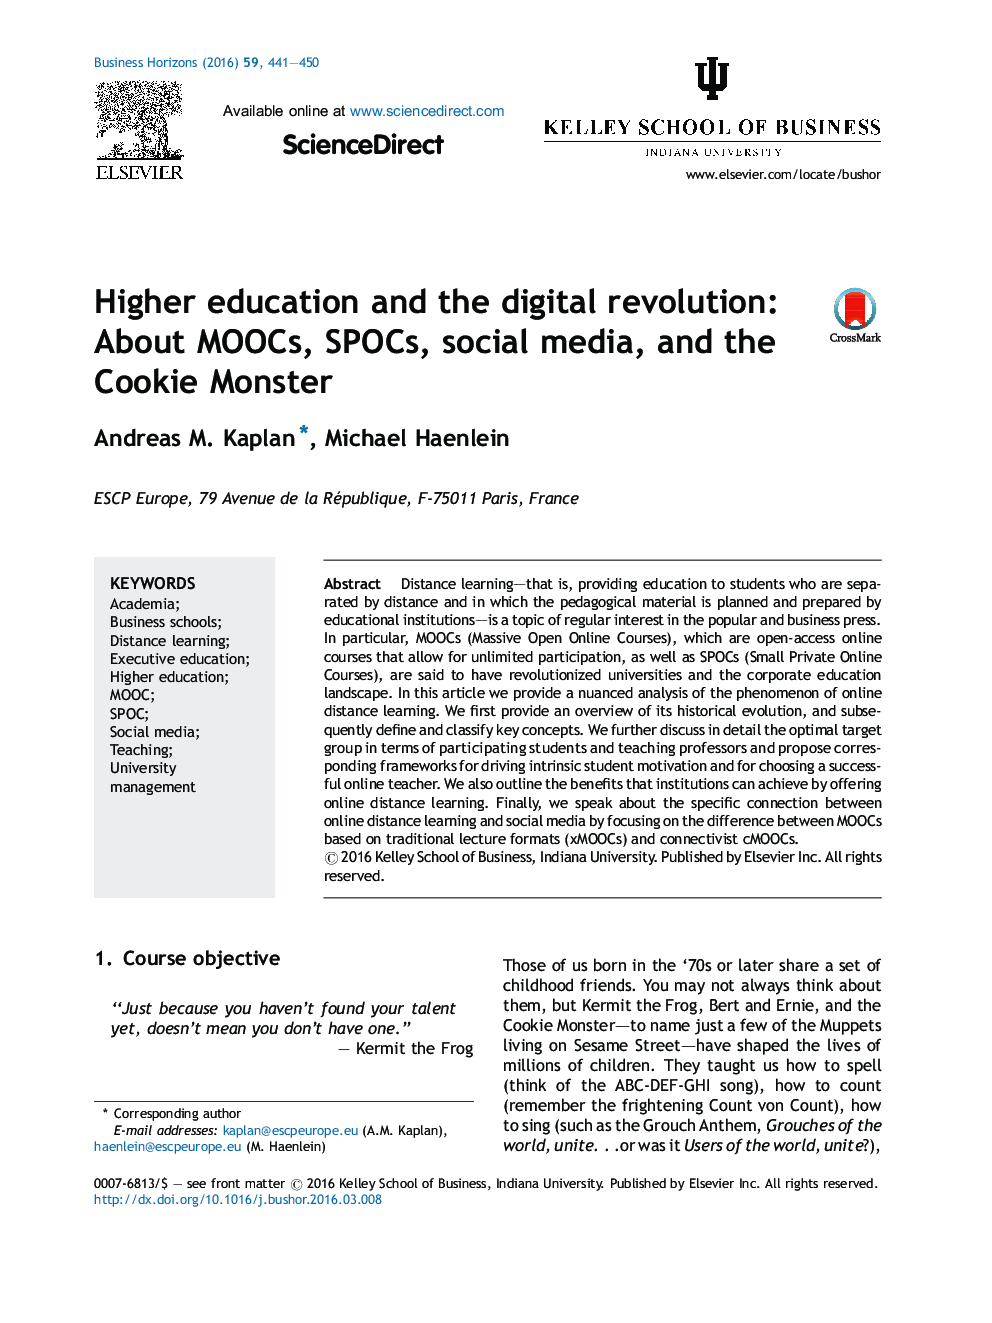 Higher education and the digital revolution: About MOOCs, SPOCs, social media, and the Cookie Monster